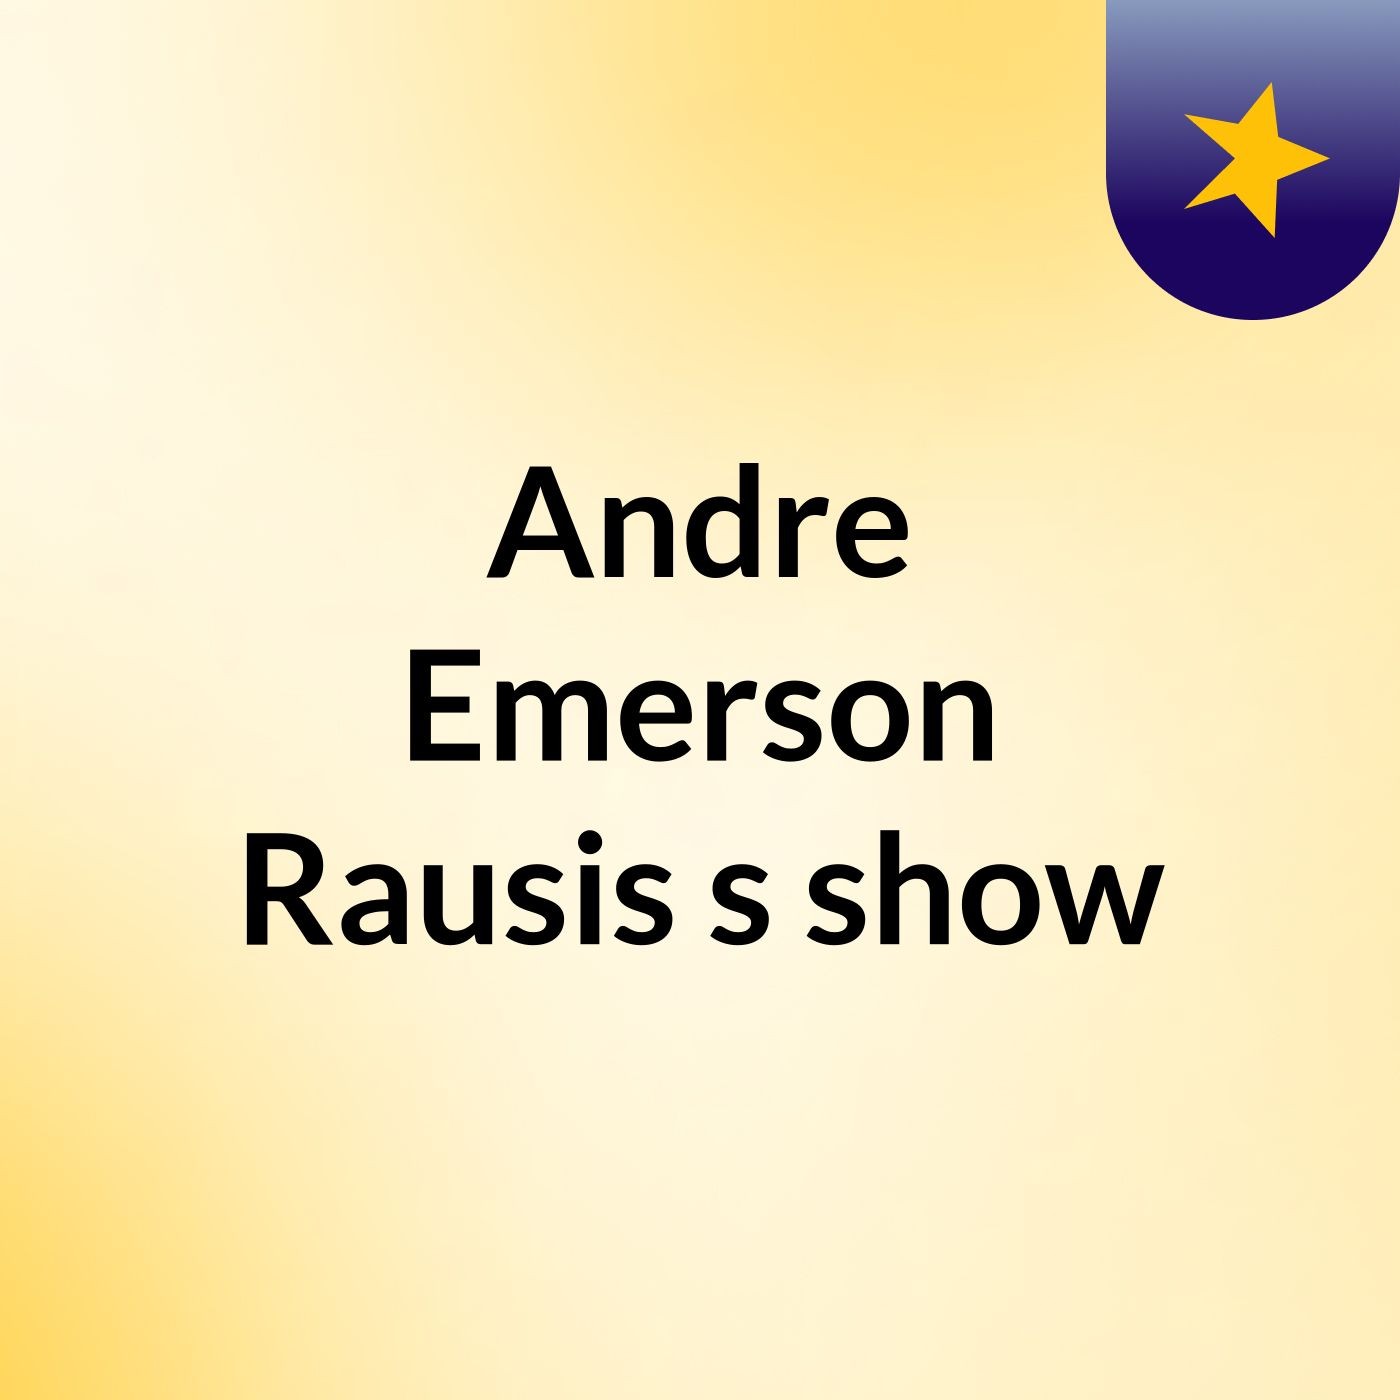 Andre Emerson Rausis's show